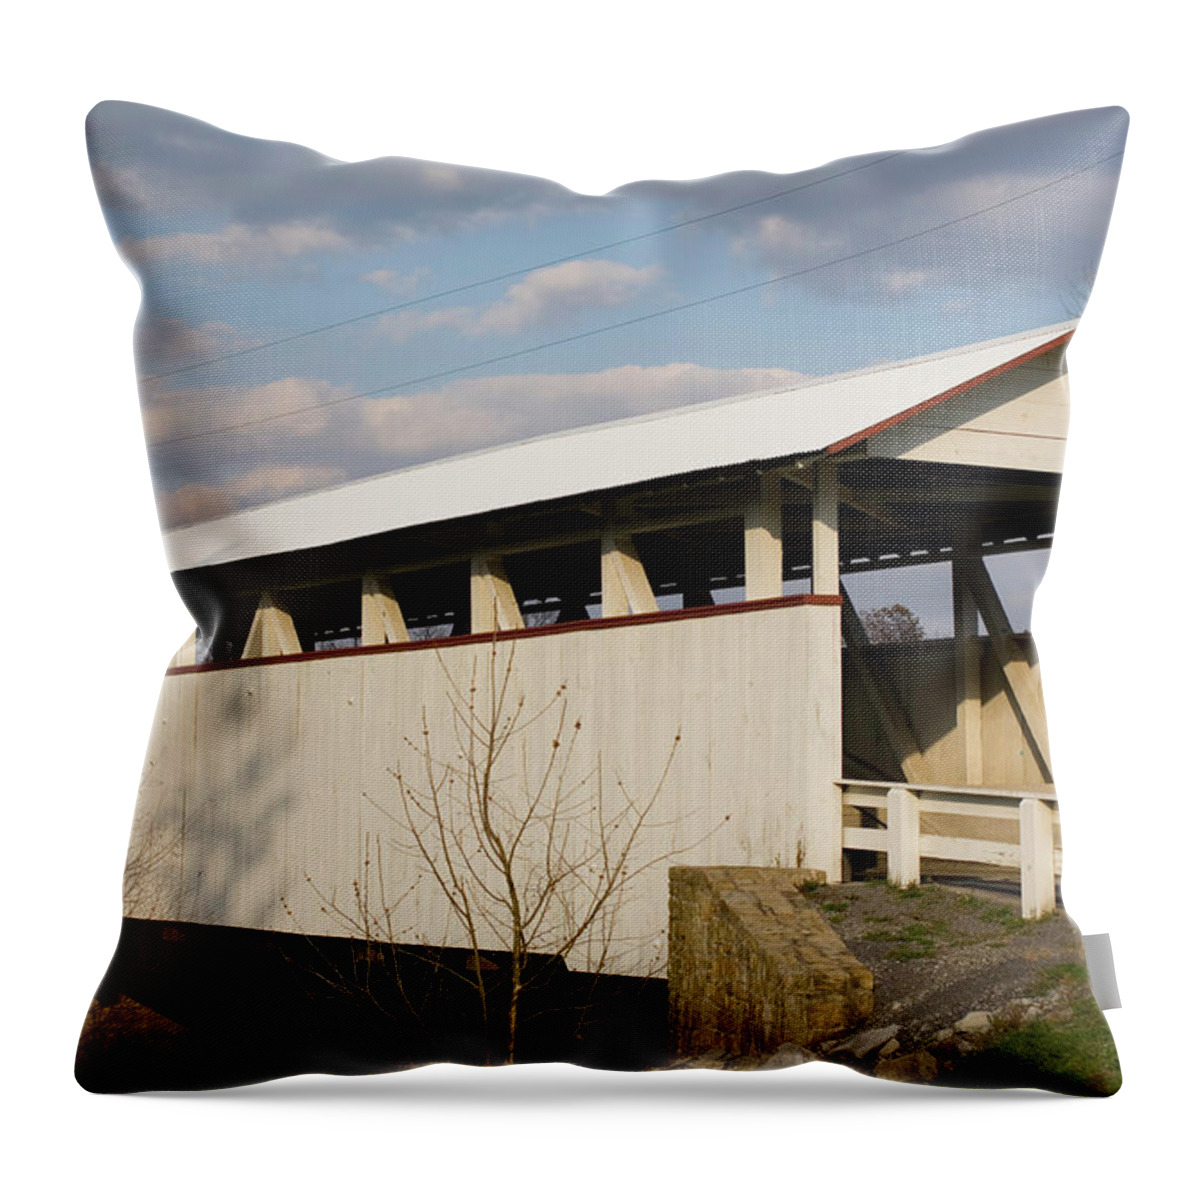 Covered Bridge Throw Pillow featuring the photograph Snook's Bridge by Norman Reid